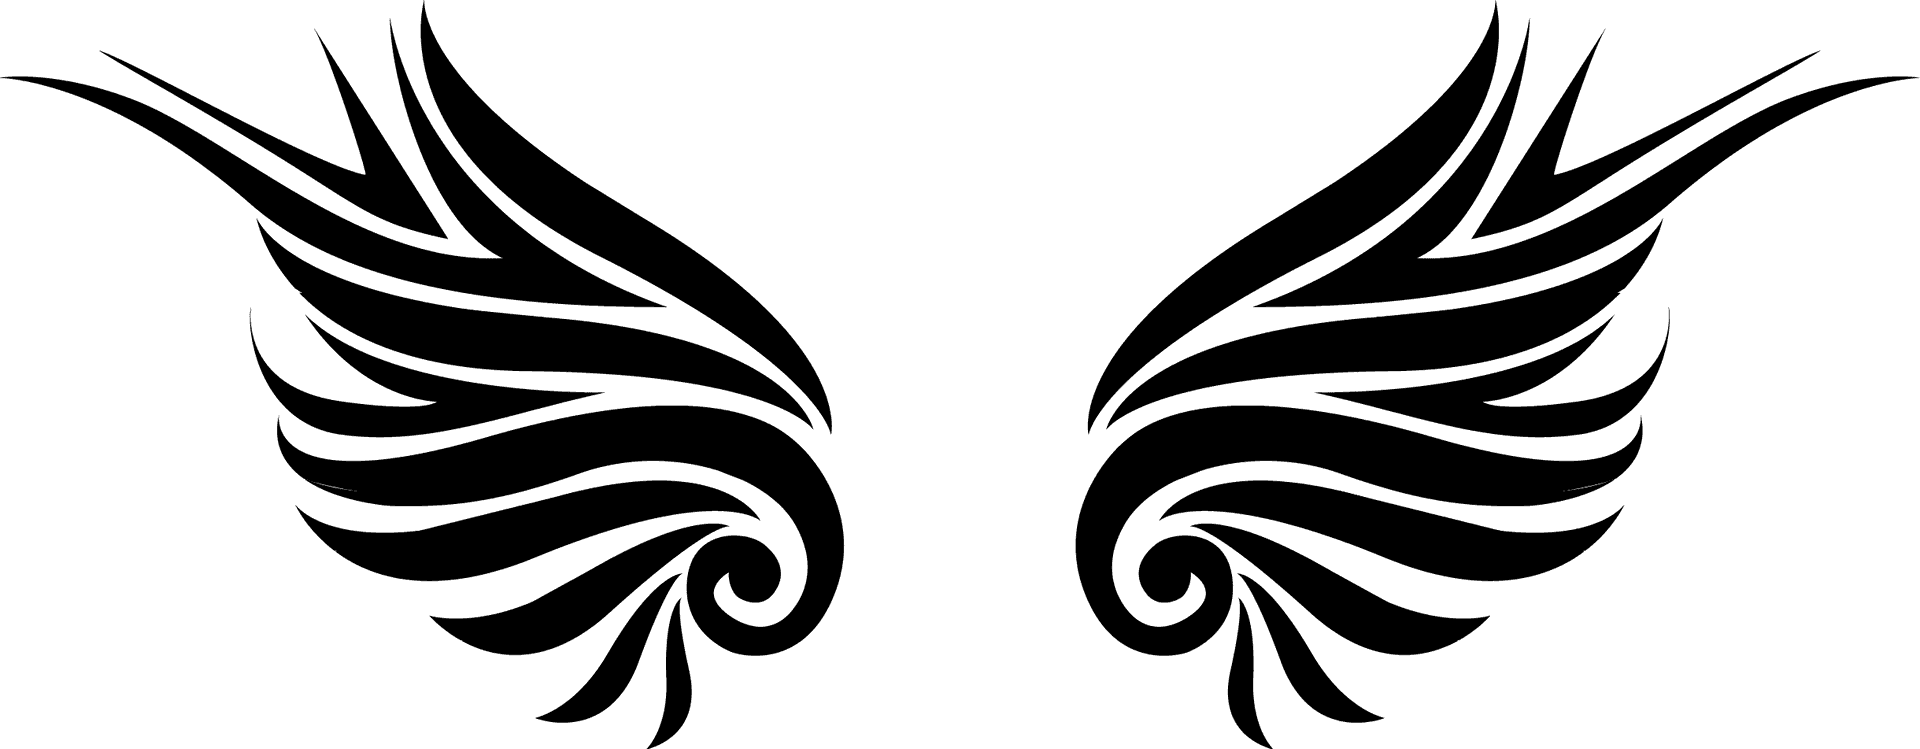 Abstract Wings Design PNG